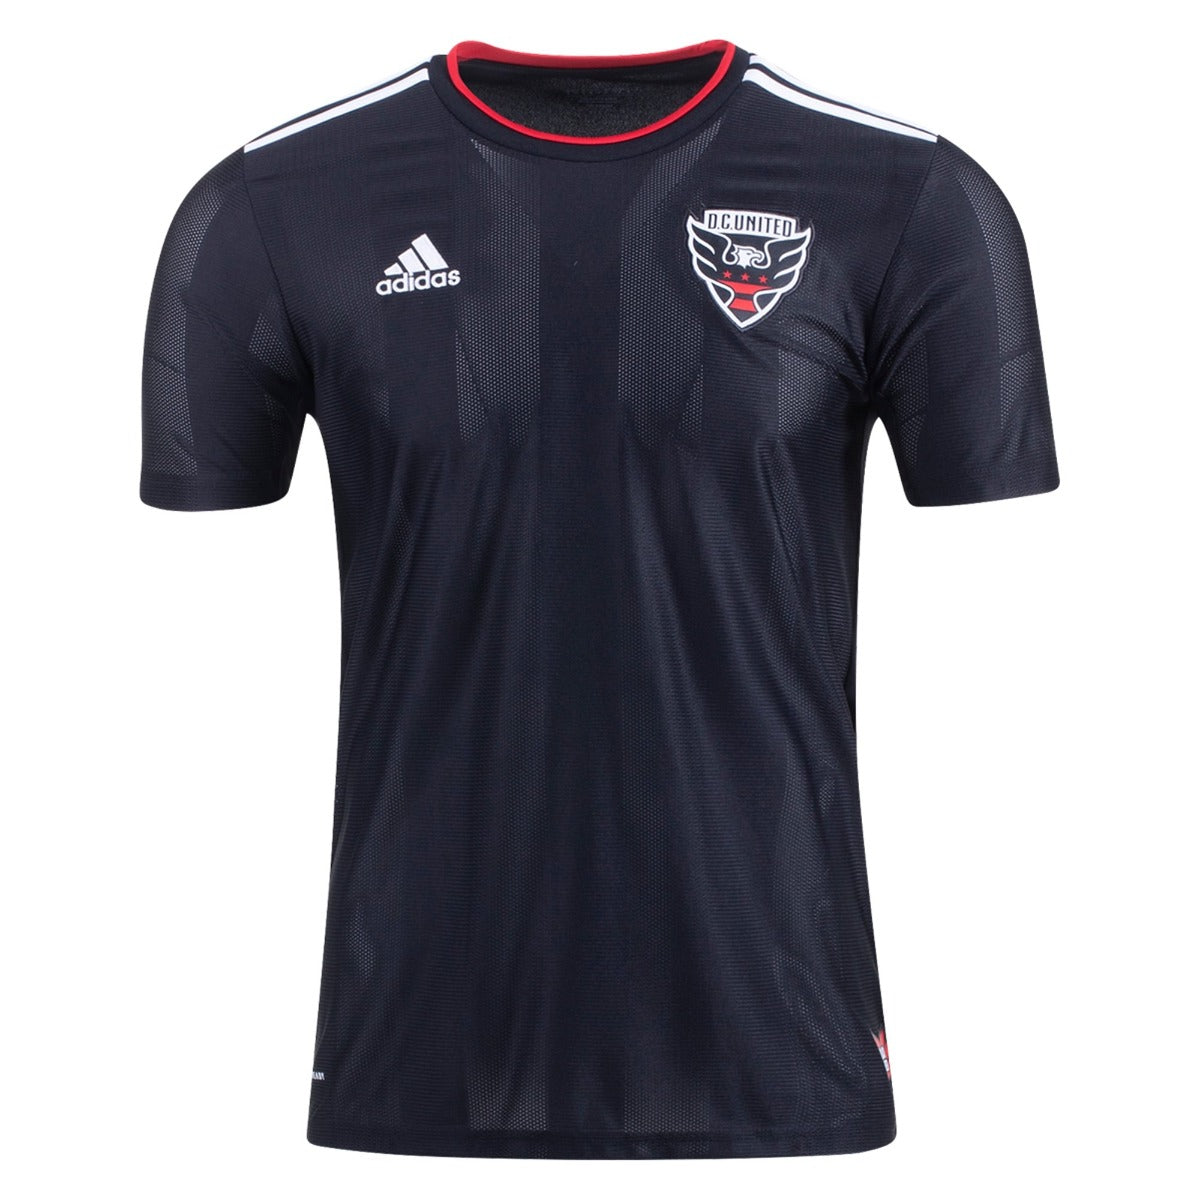 adidas 22-23 DC United Home Jersey - Black-Red